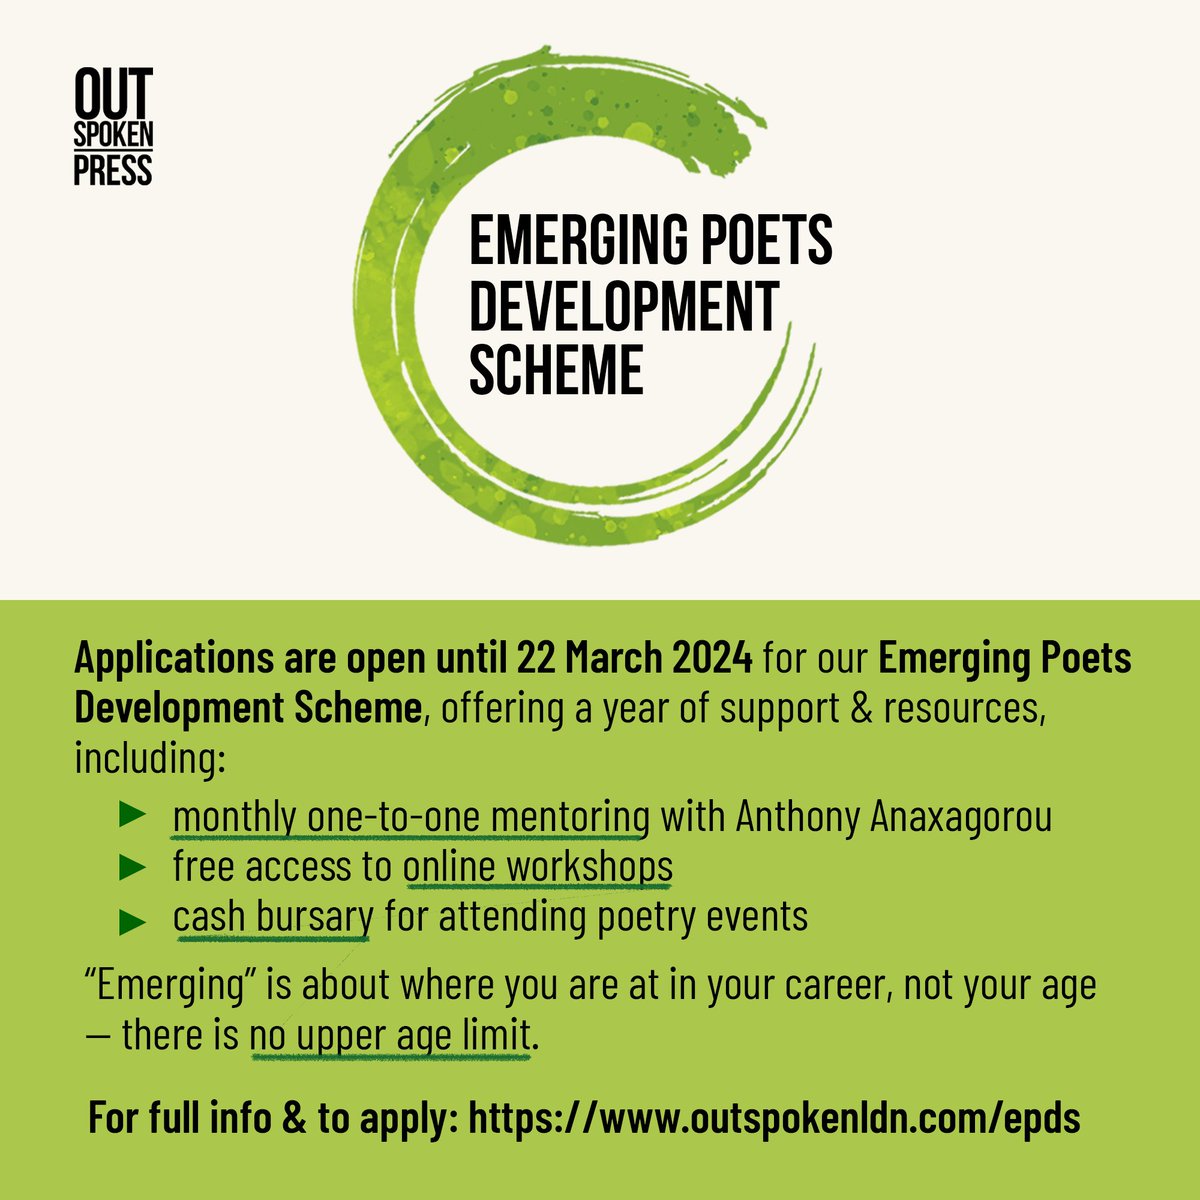 Applications are OPEN to 22 March for the next year of our Emerging Poets Development Scheme, offering a year of resources incl. 1-2-1 monthly mentoring with @Anthony1983 to poets yet to publish a full collection. No upper age limit Full details & apply: outspokenldn.com/epds